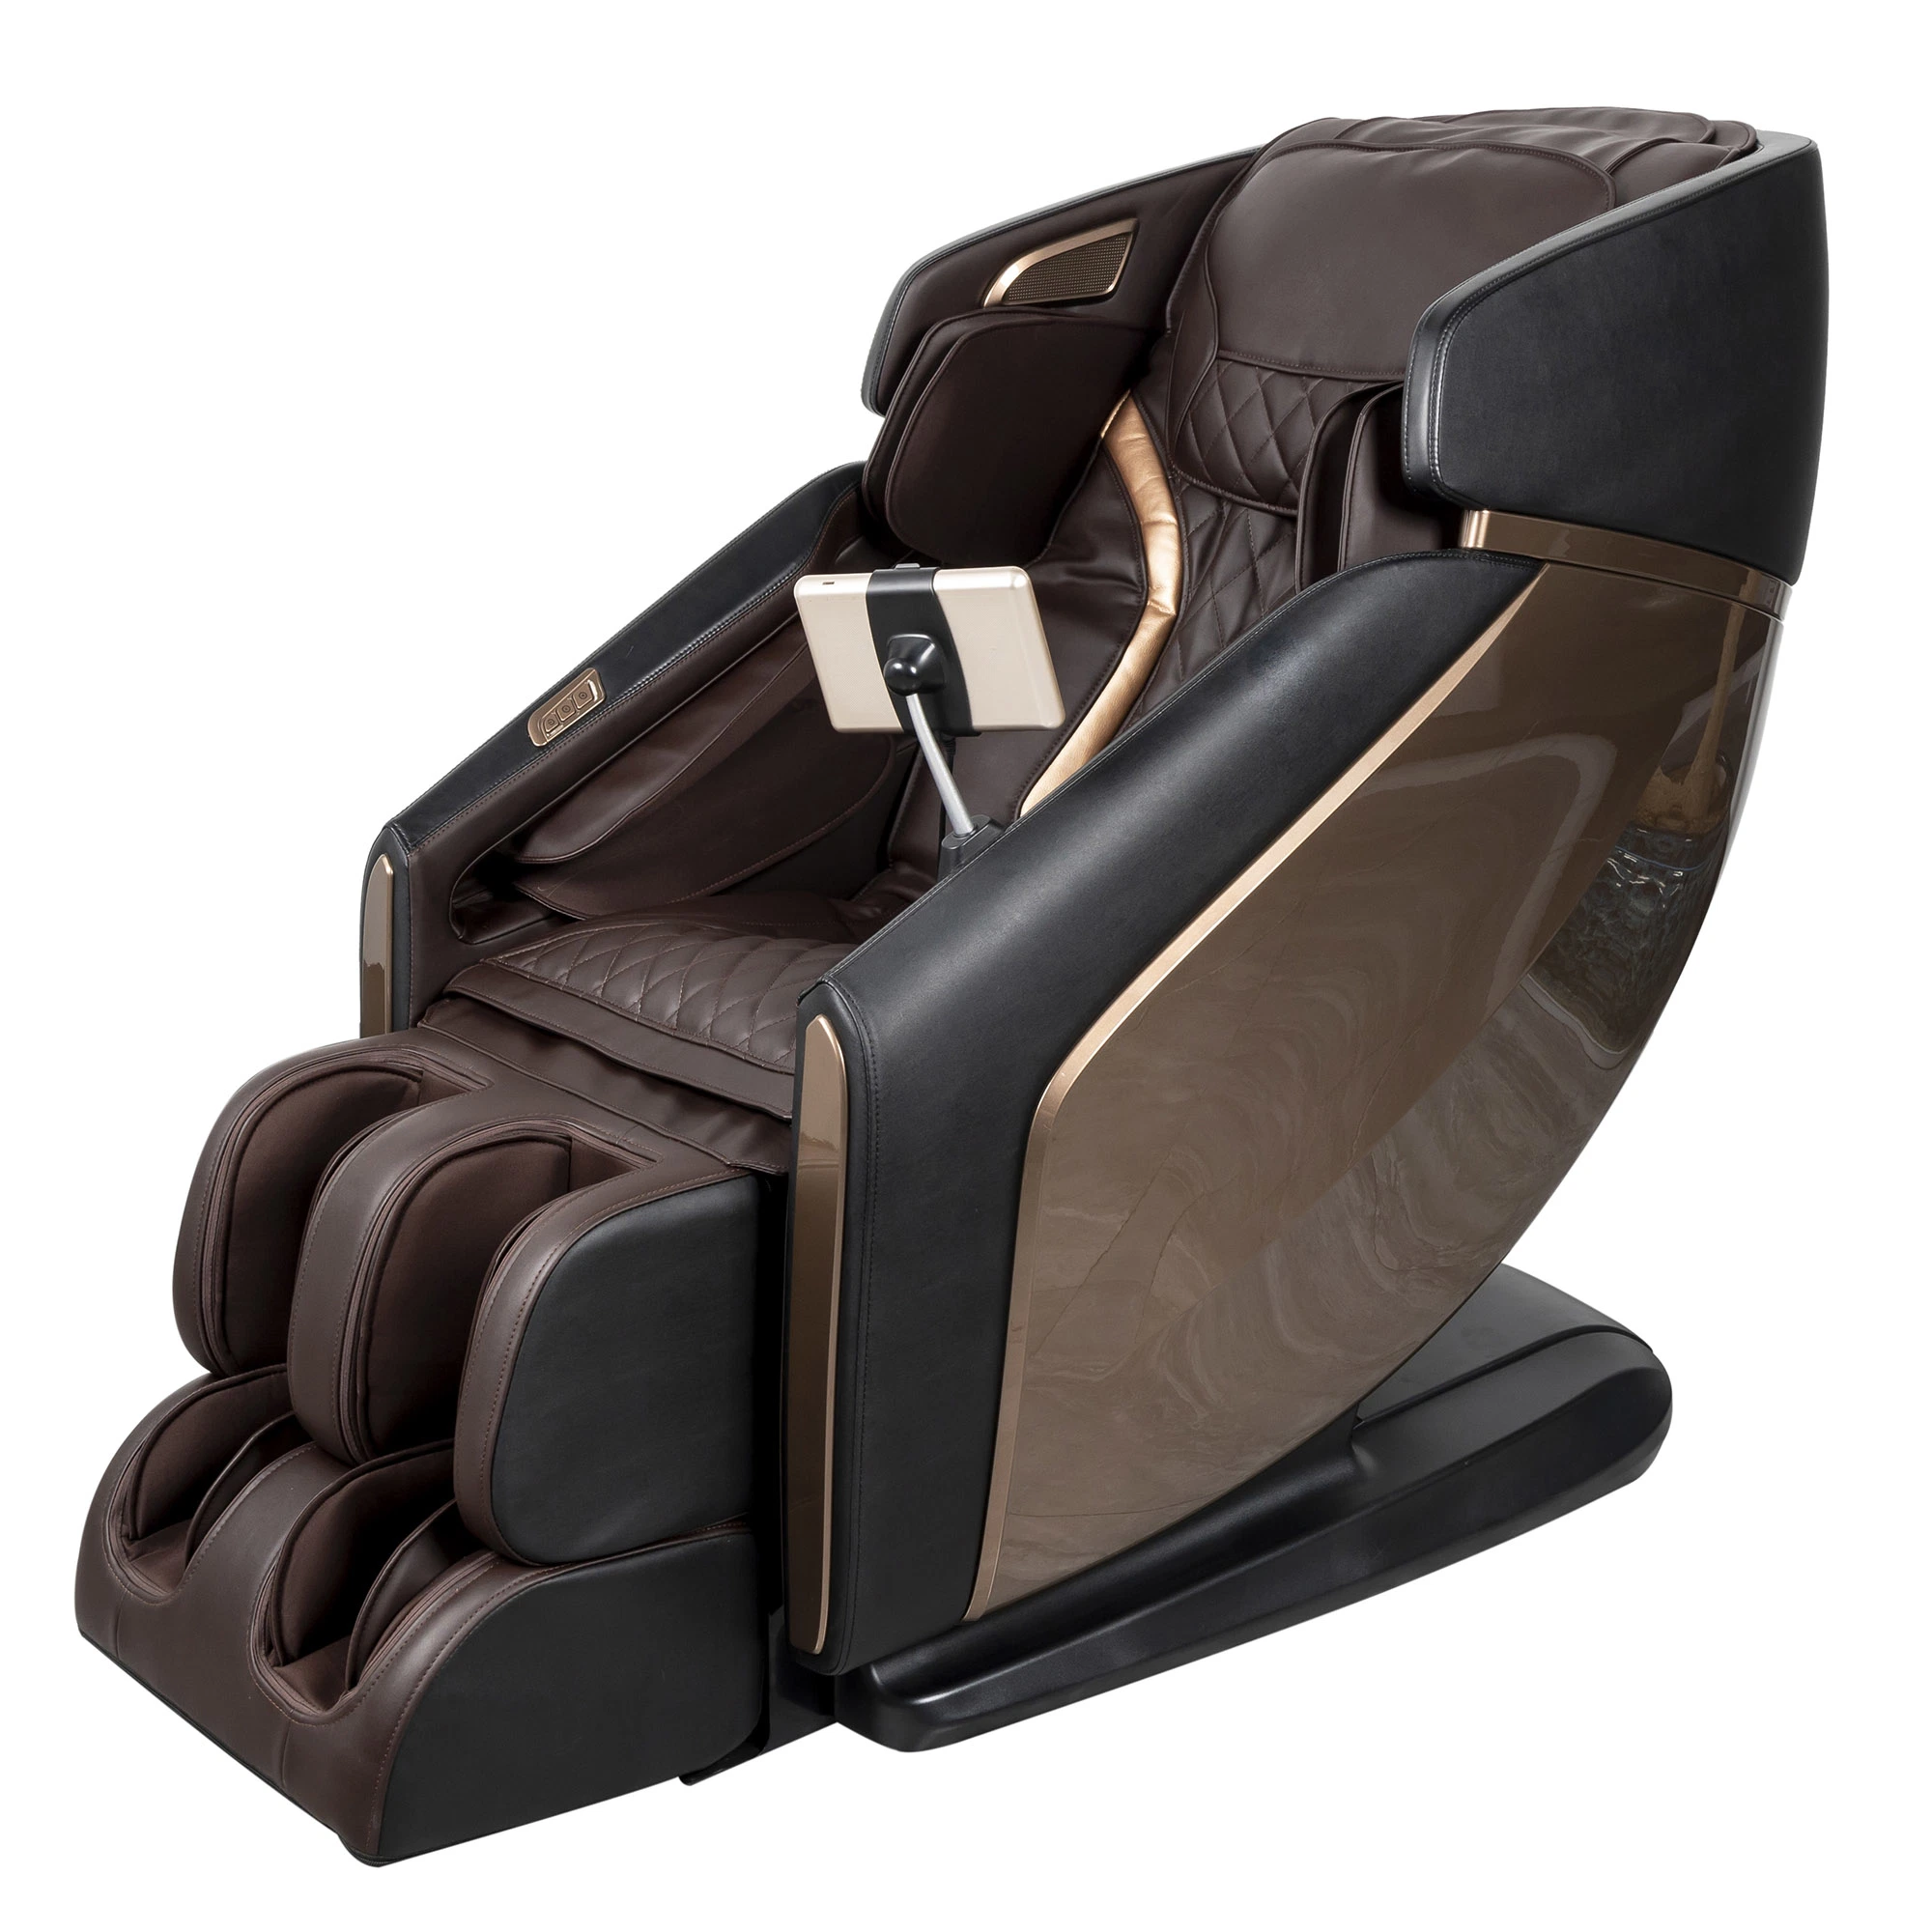 SL Track 4D Full Body Massage Chair 2022 Best Design for Home Furniture Store